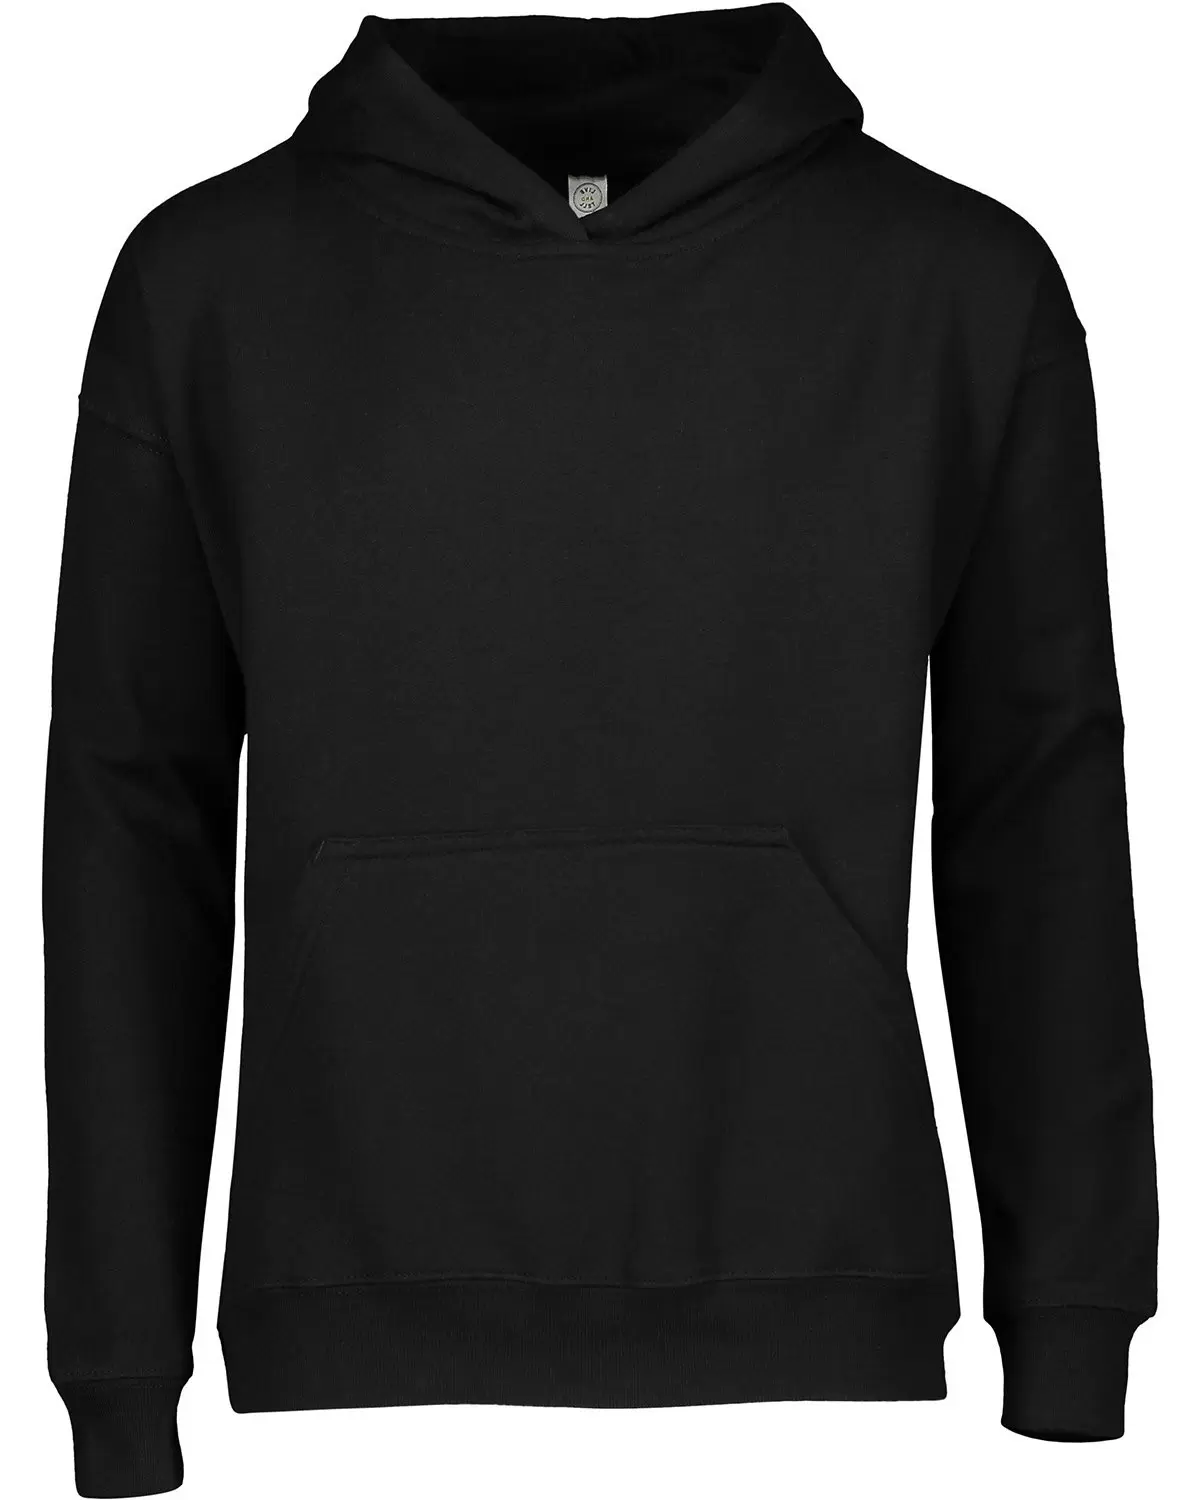 L2296 LA T Youth Fleece Hooded Pullover Sweatshirt with Pouch Pocket ...